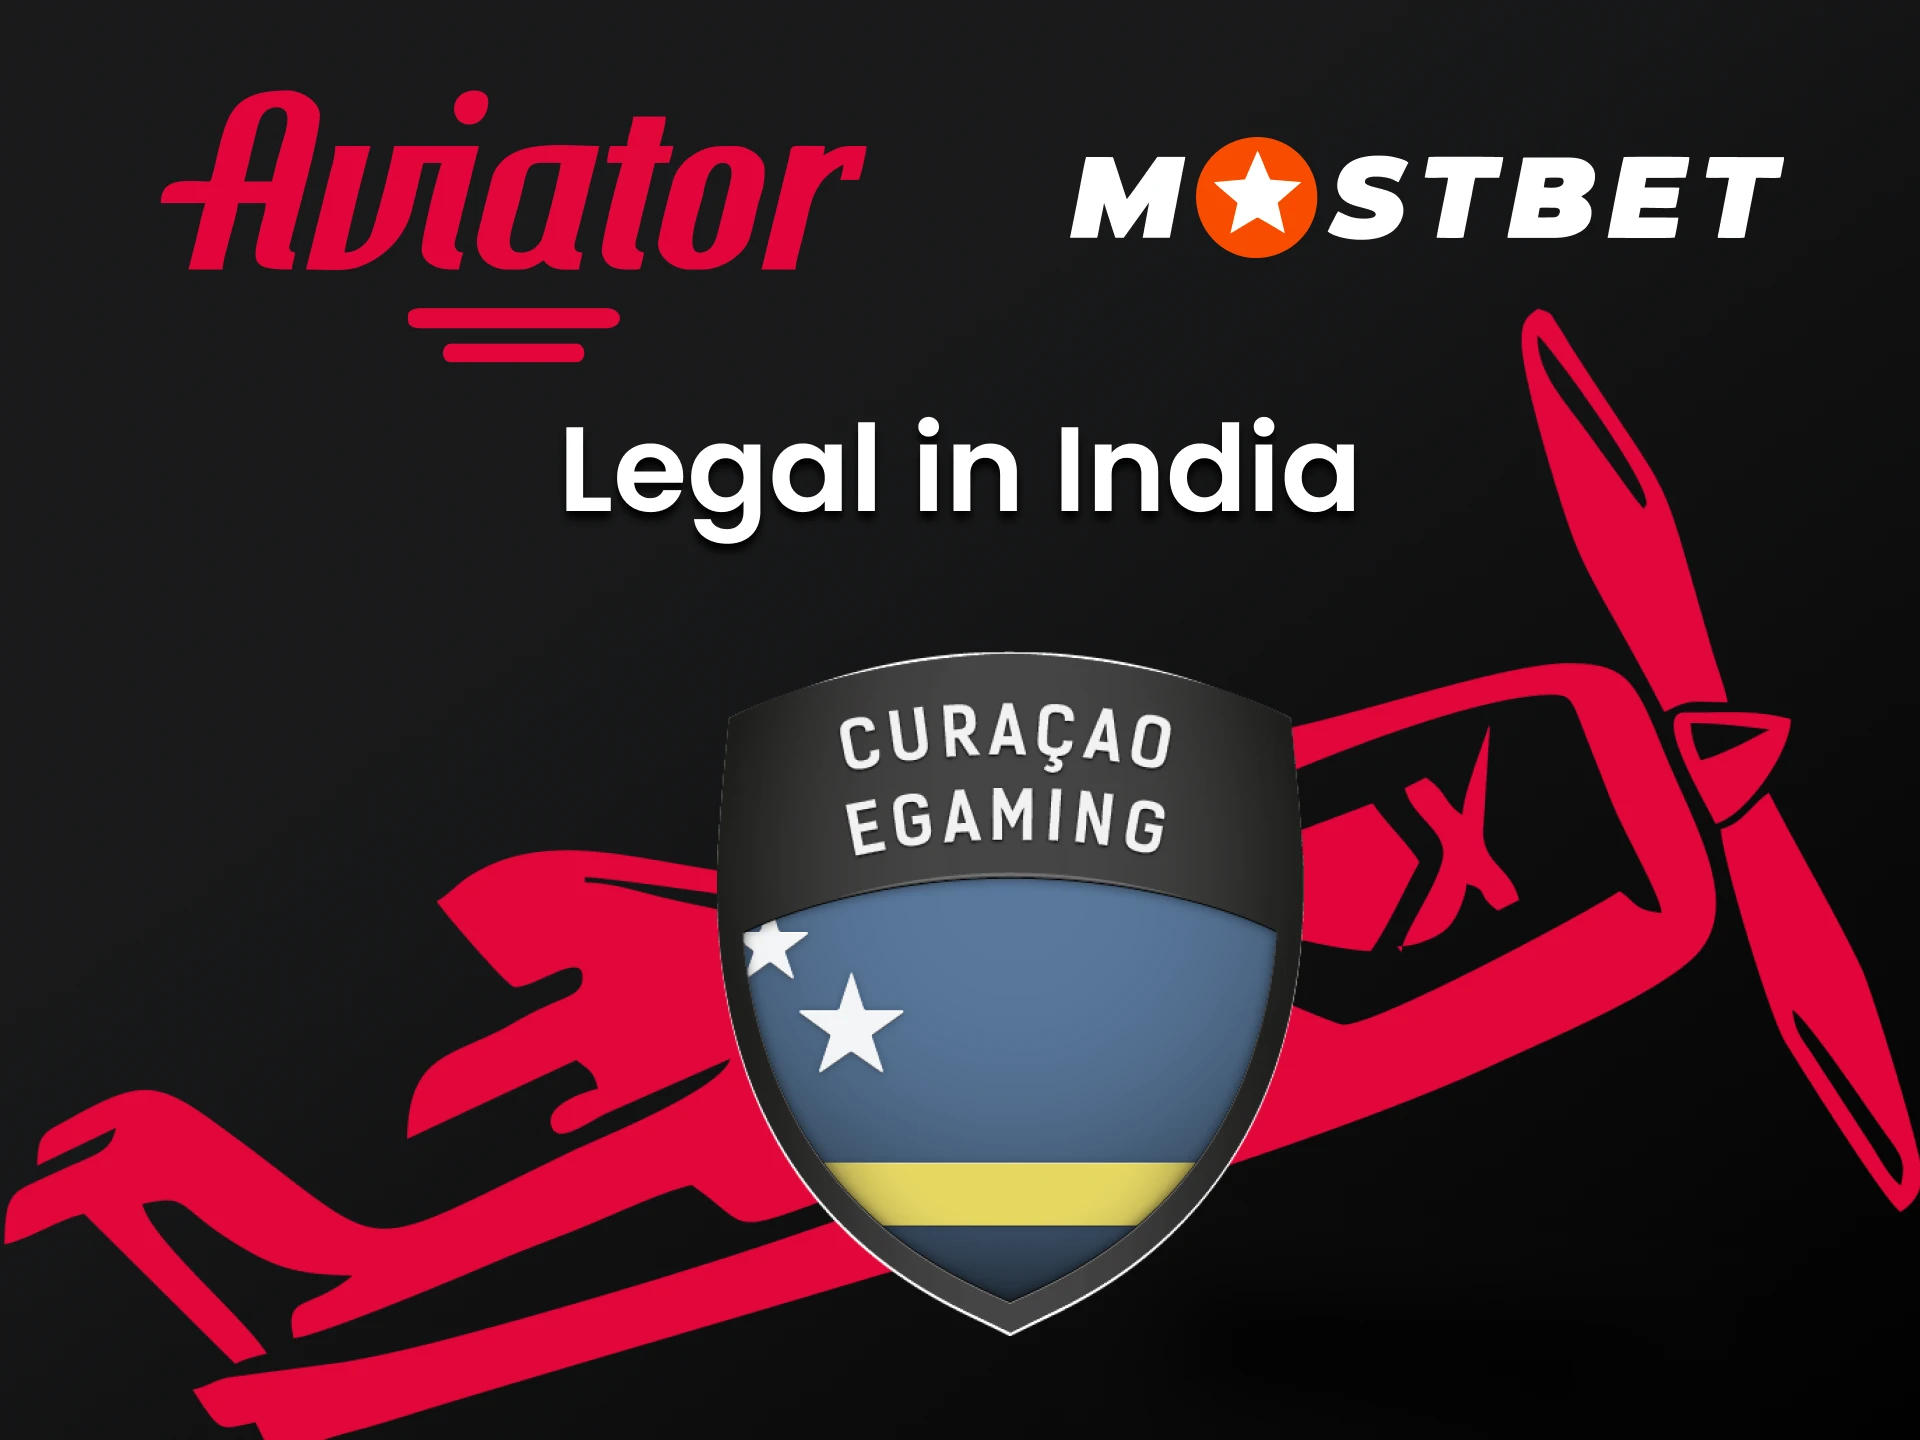 Play Aviator legally at Mostbet.